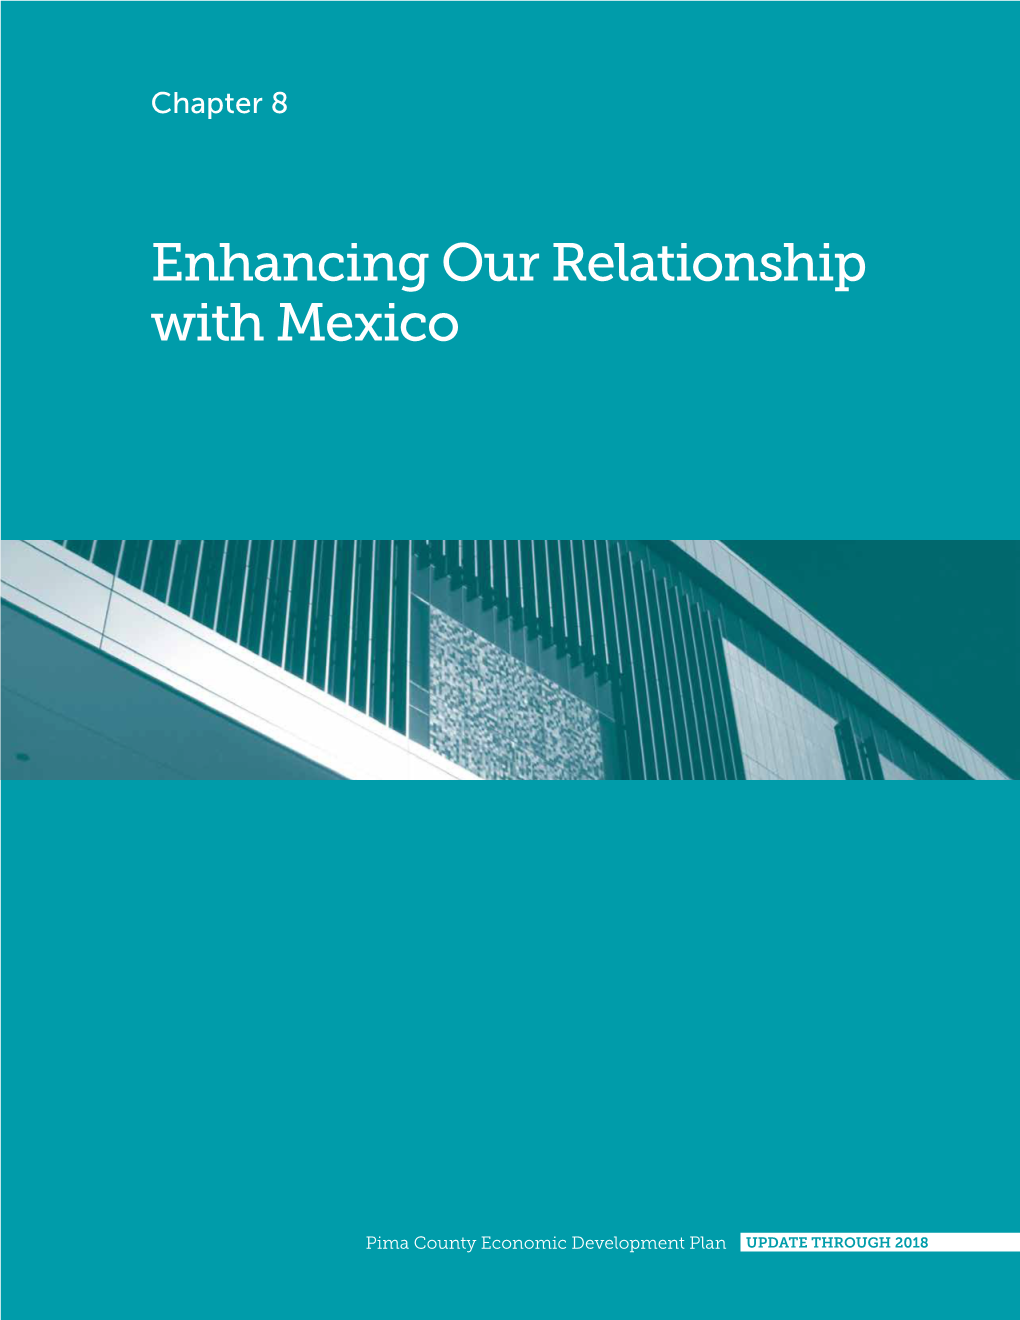 Enhancing Our Relationship with Mexico